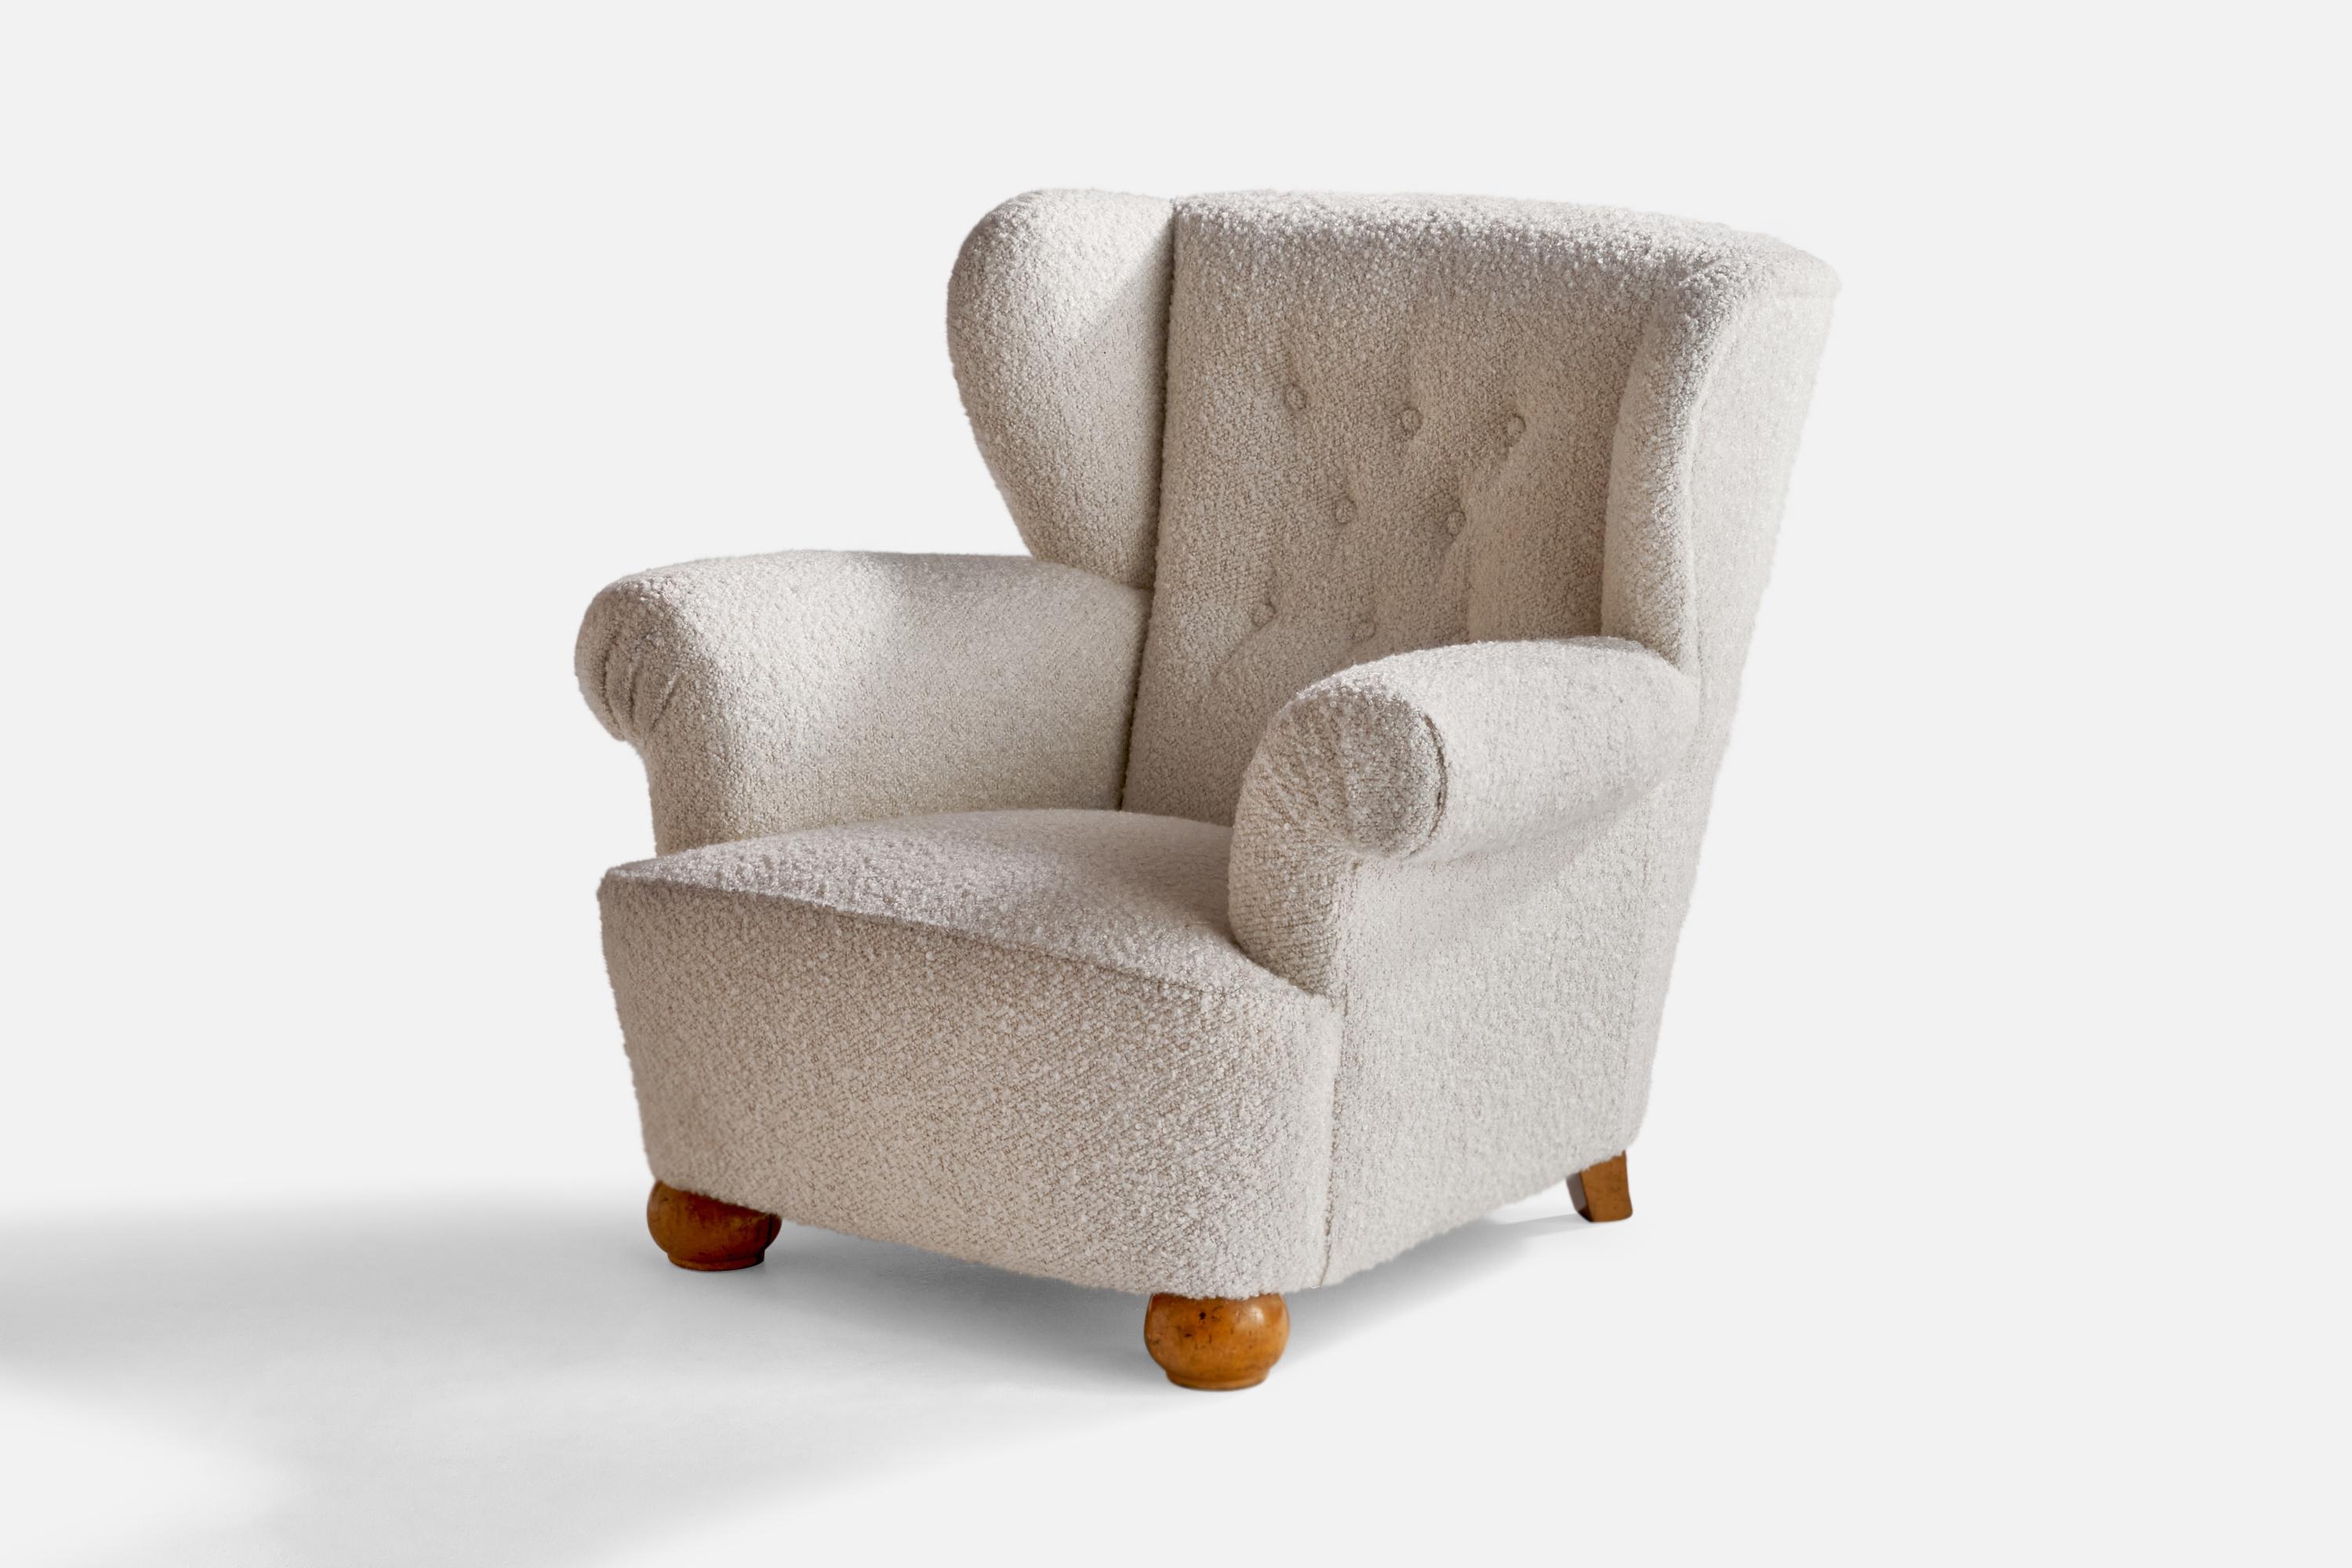 A white bouclé fabric and oak lounge chair designed and produced in Sweden, 1940s.

Seat height is 15”